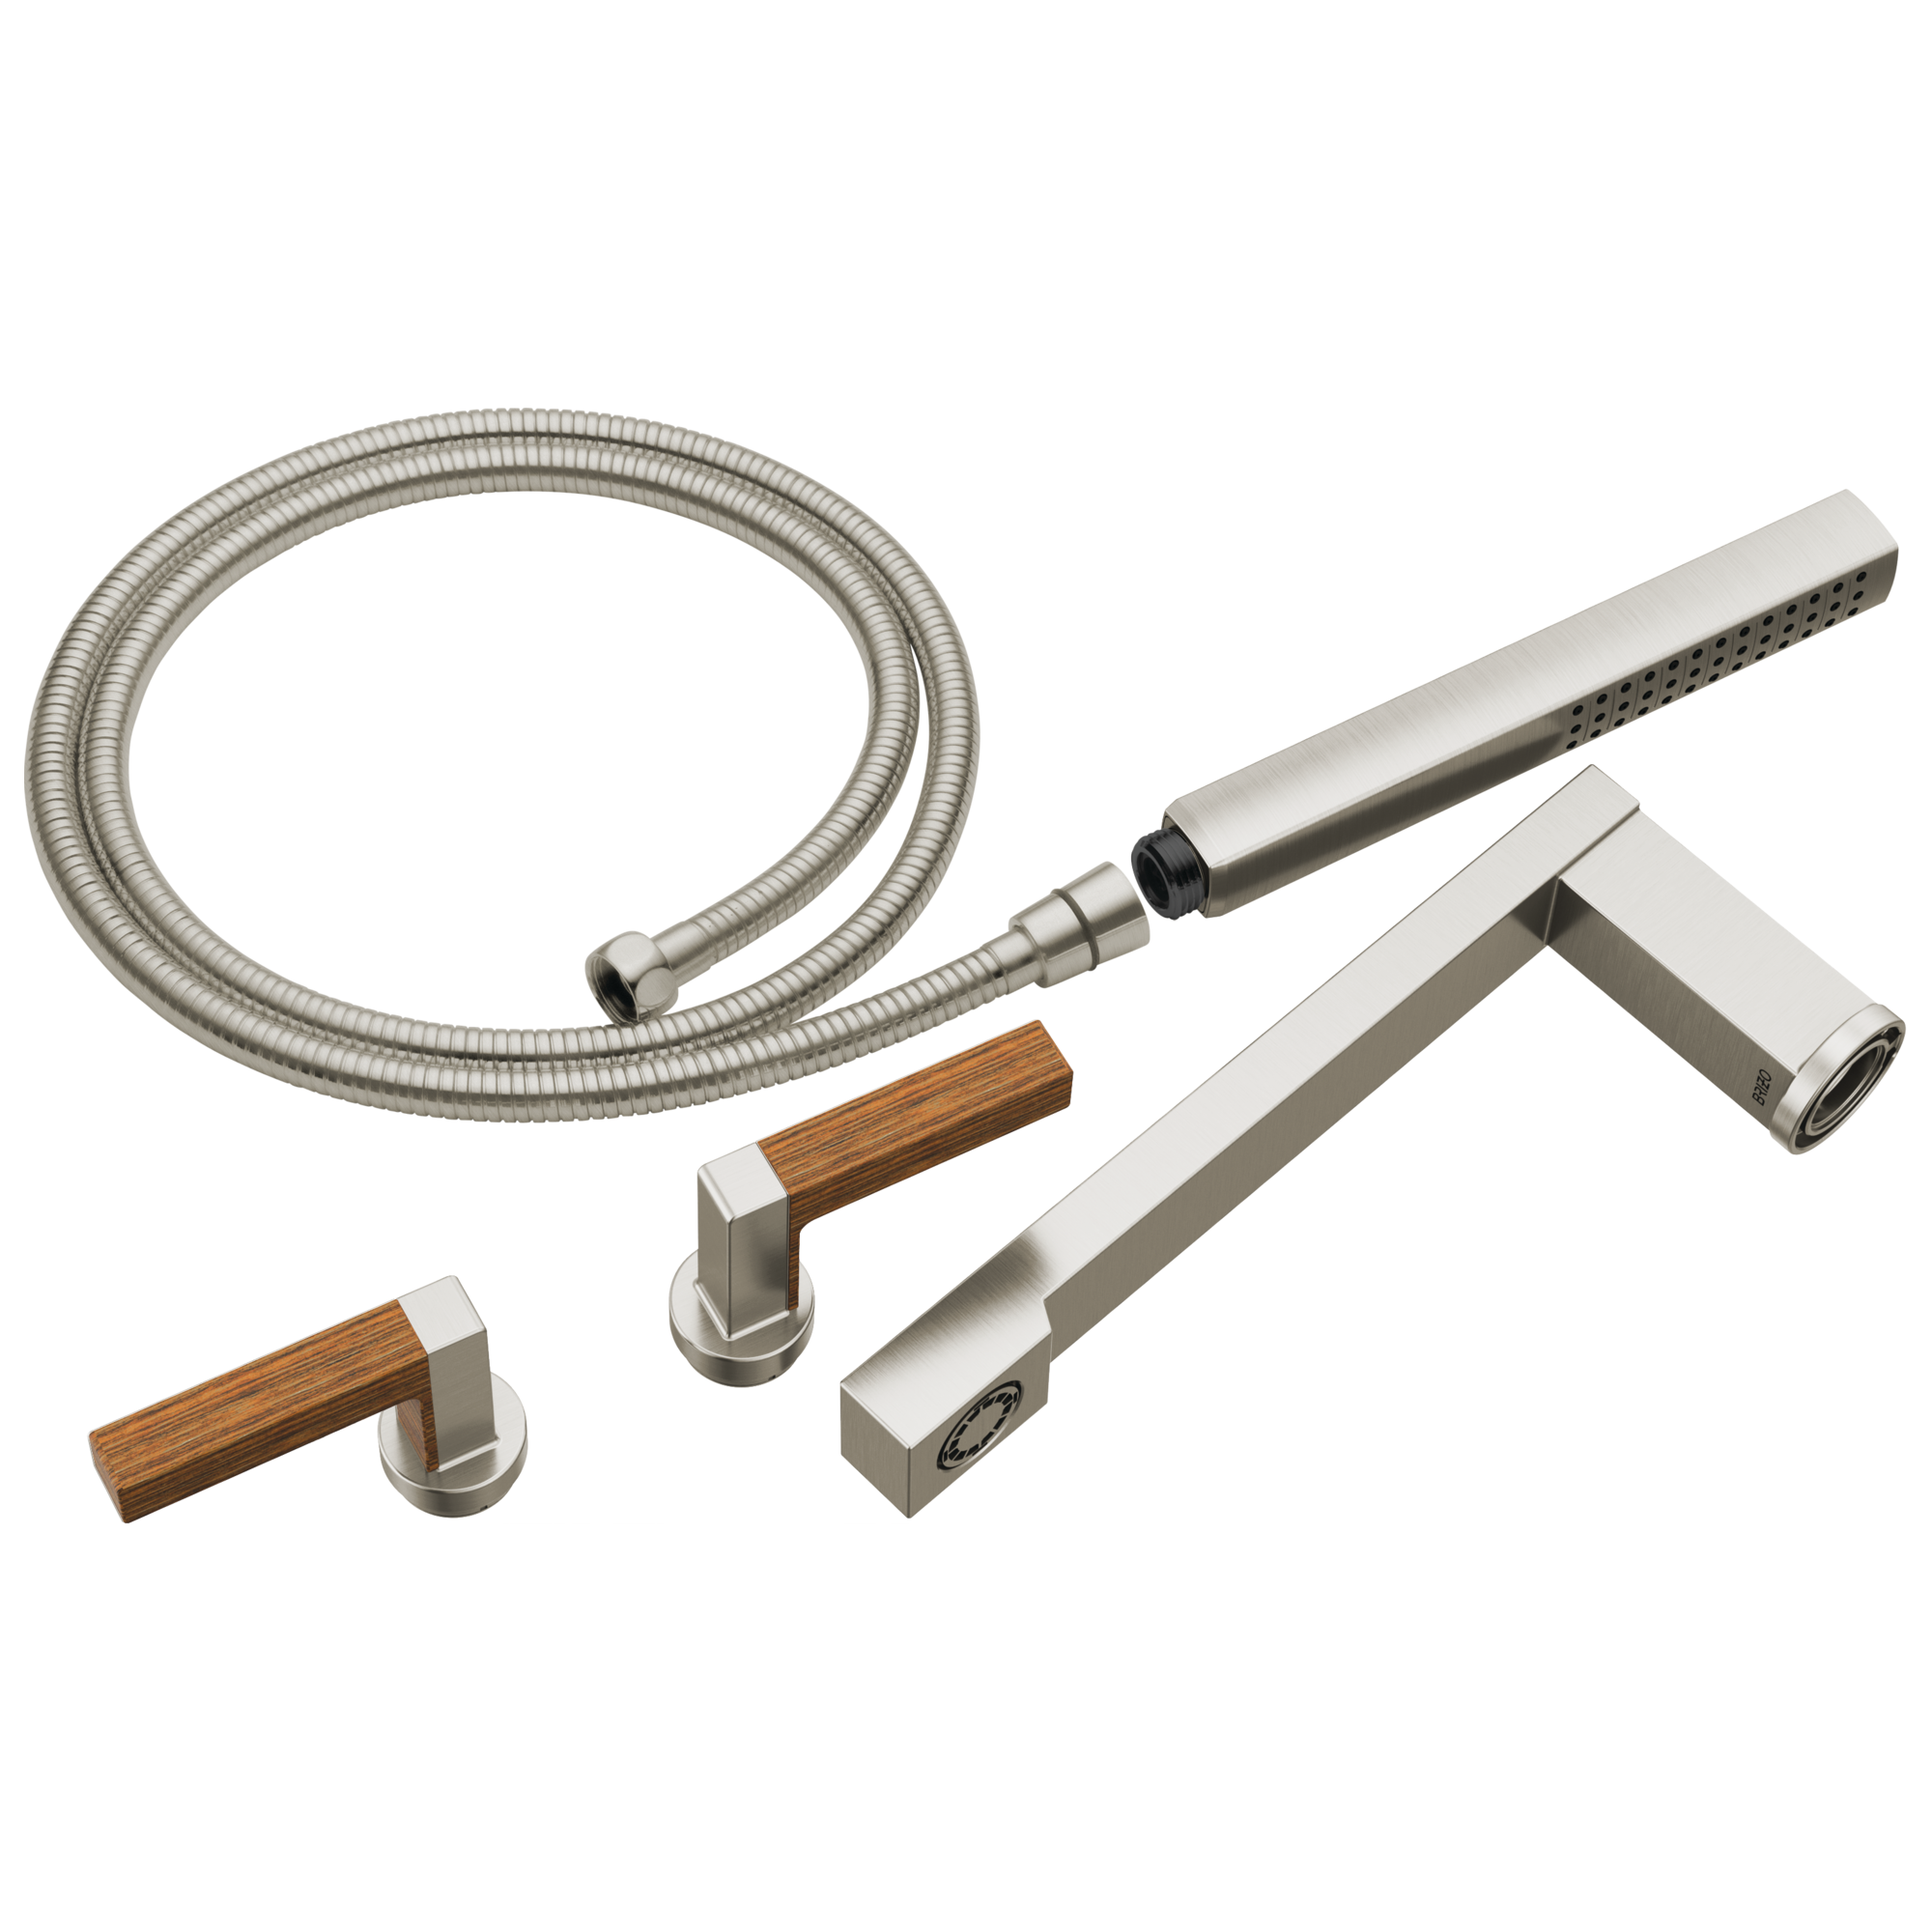 Brizo Frank Lloyd Wright Two-Handle Tub Filler Trim Kit with Lever Handles